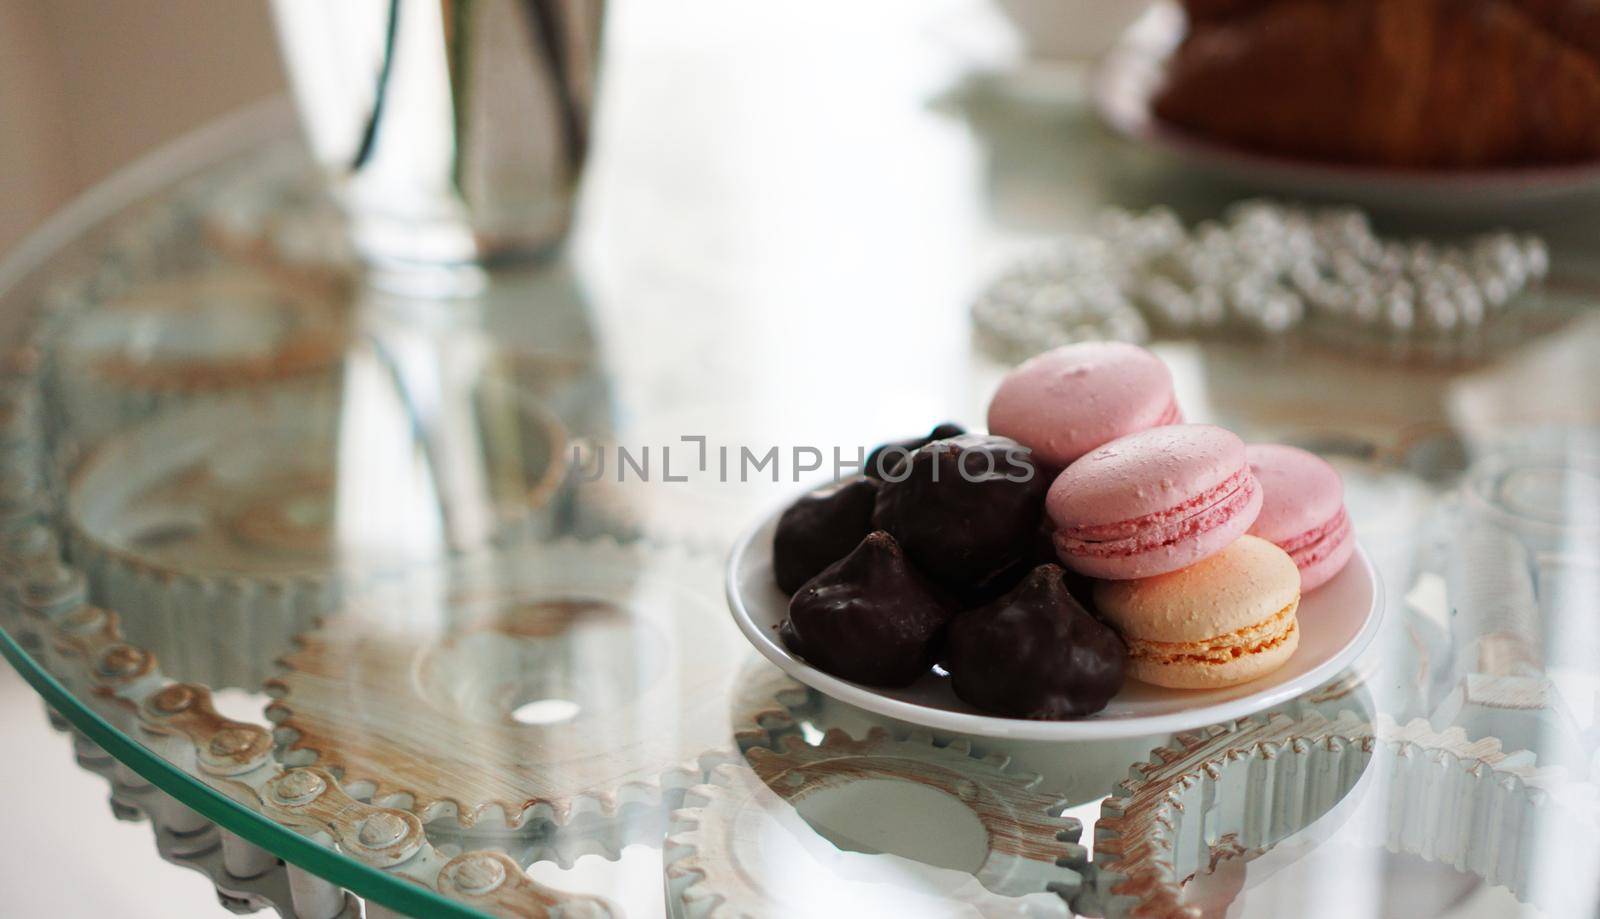 Macaroons on a glass table. Sweets for breakfast. Sunny photo. Romantic breakfast concept